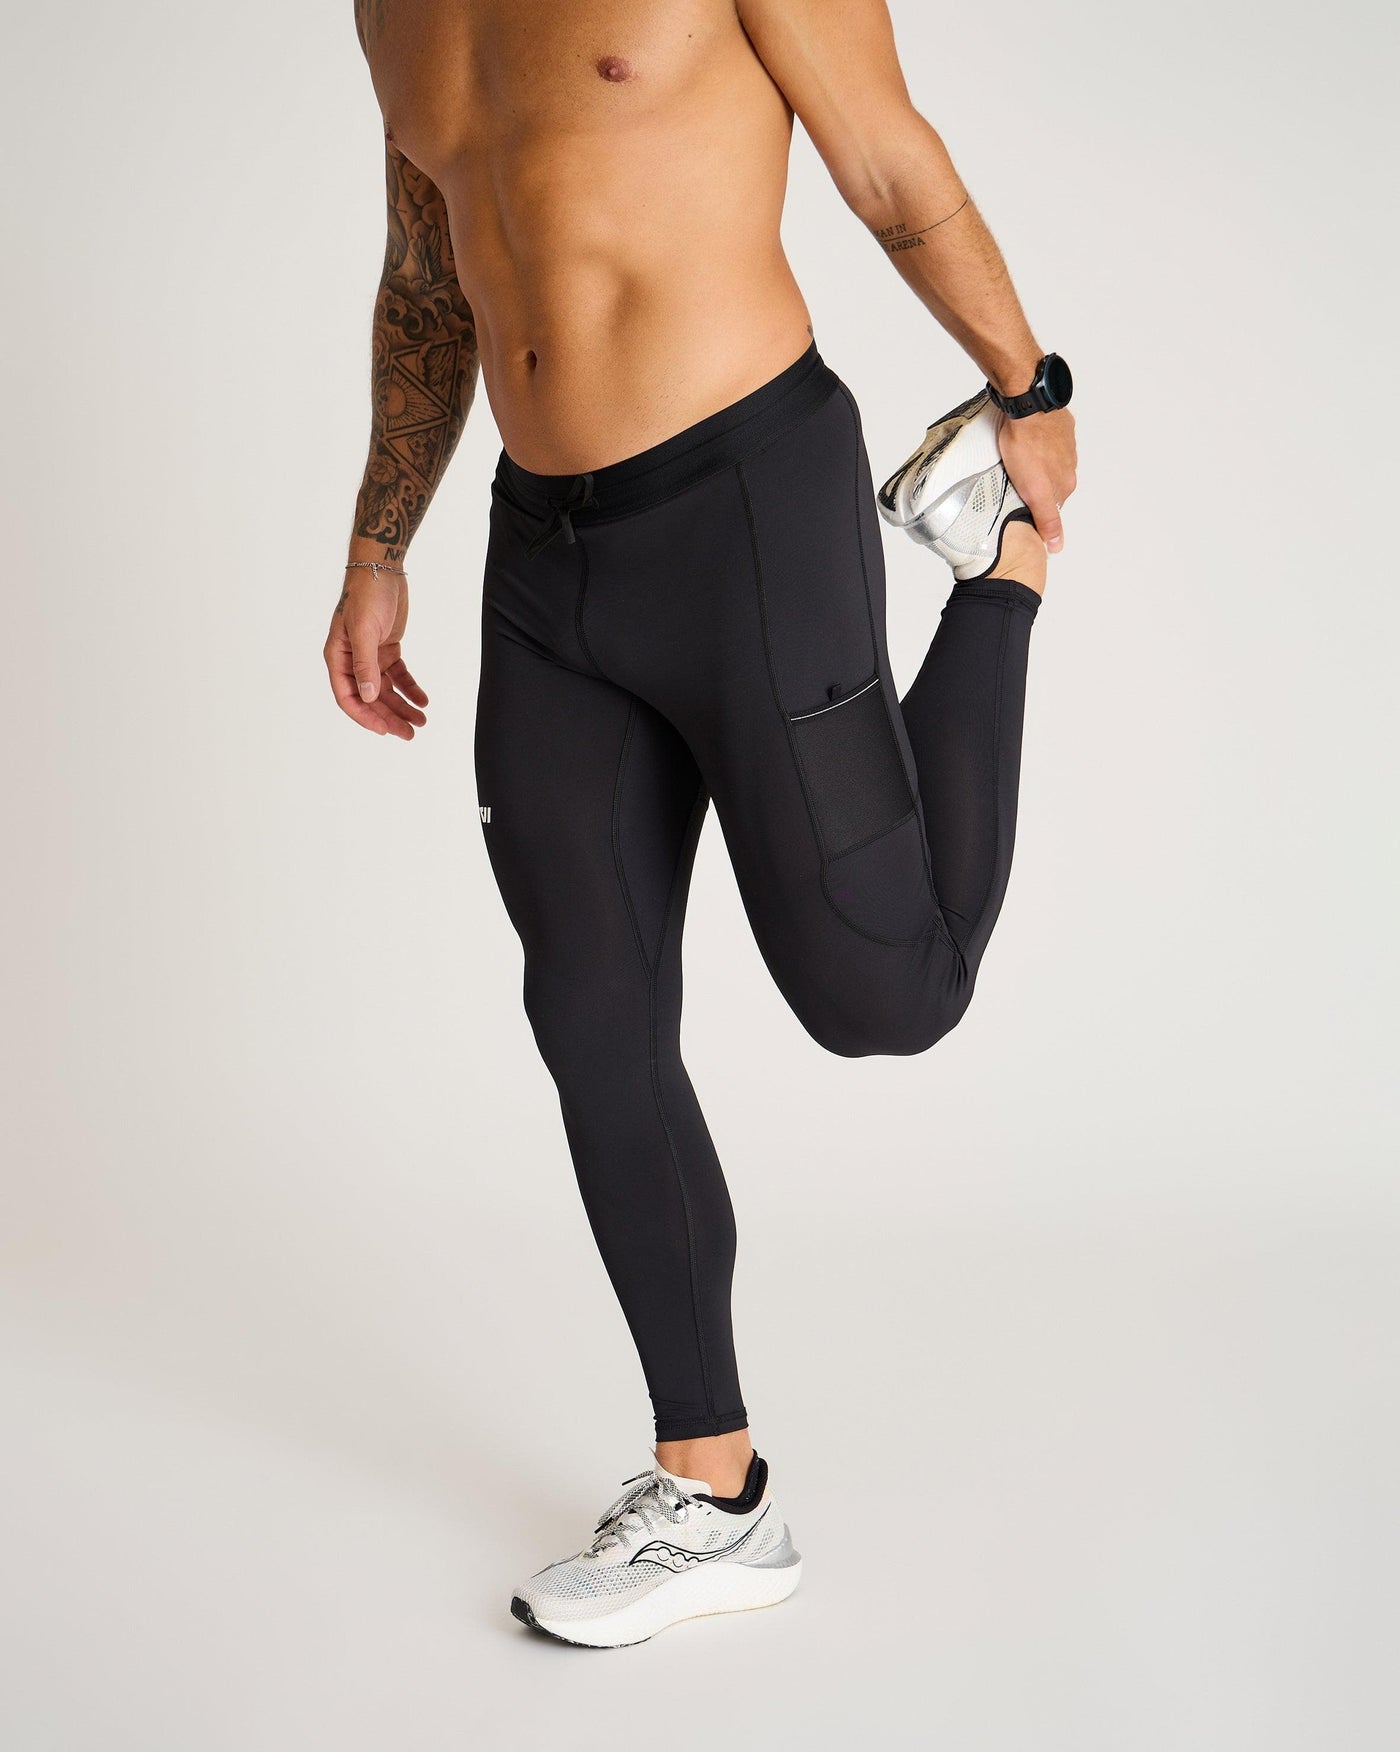 4F Functional Trousers with Back Pocket - Running tights Men's